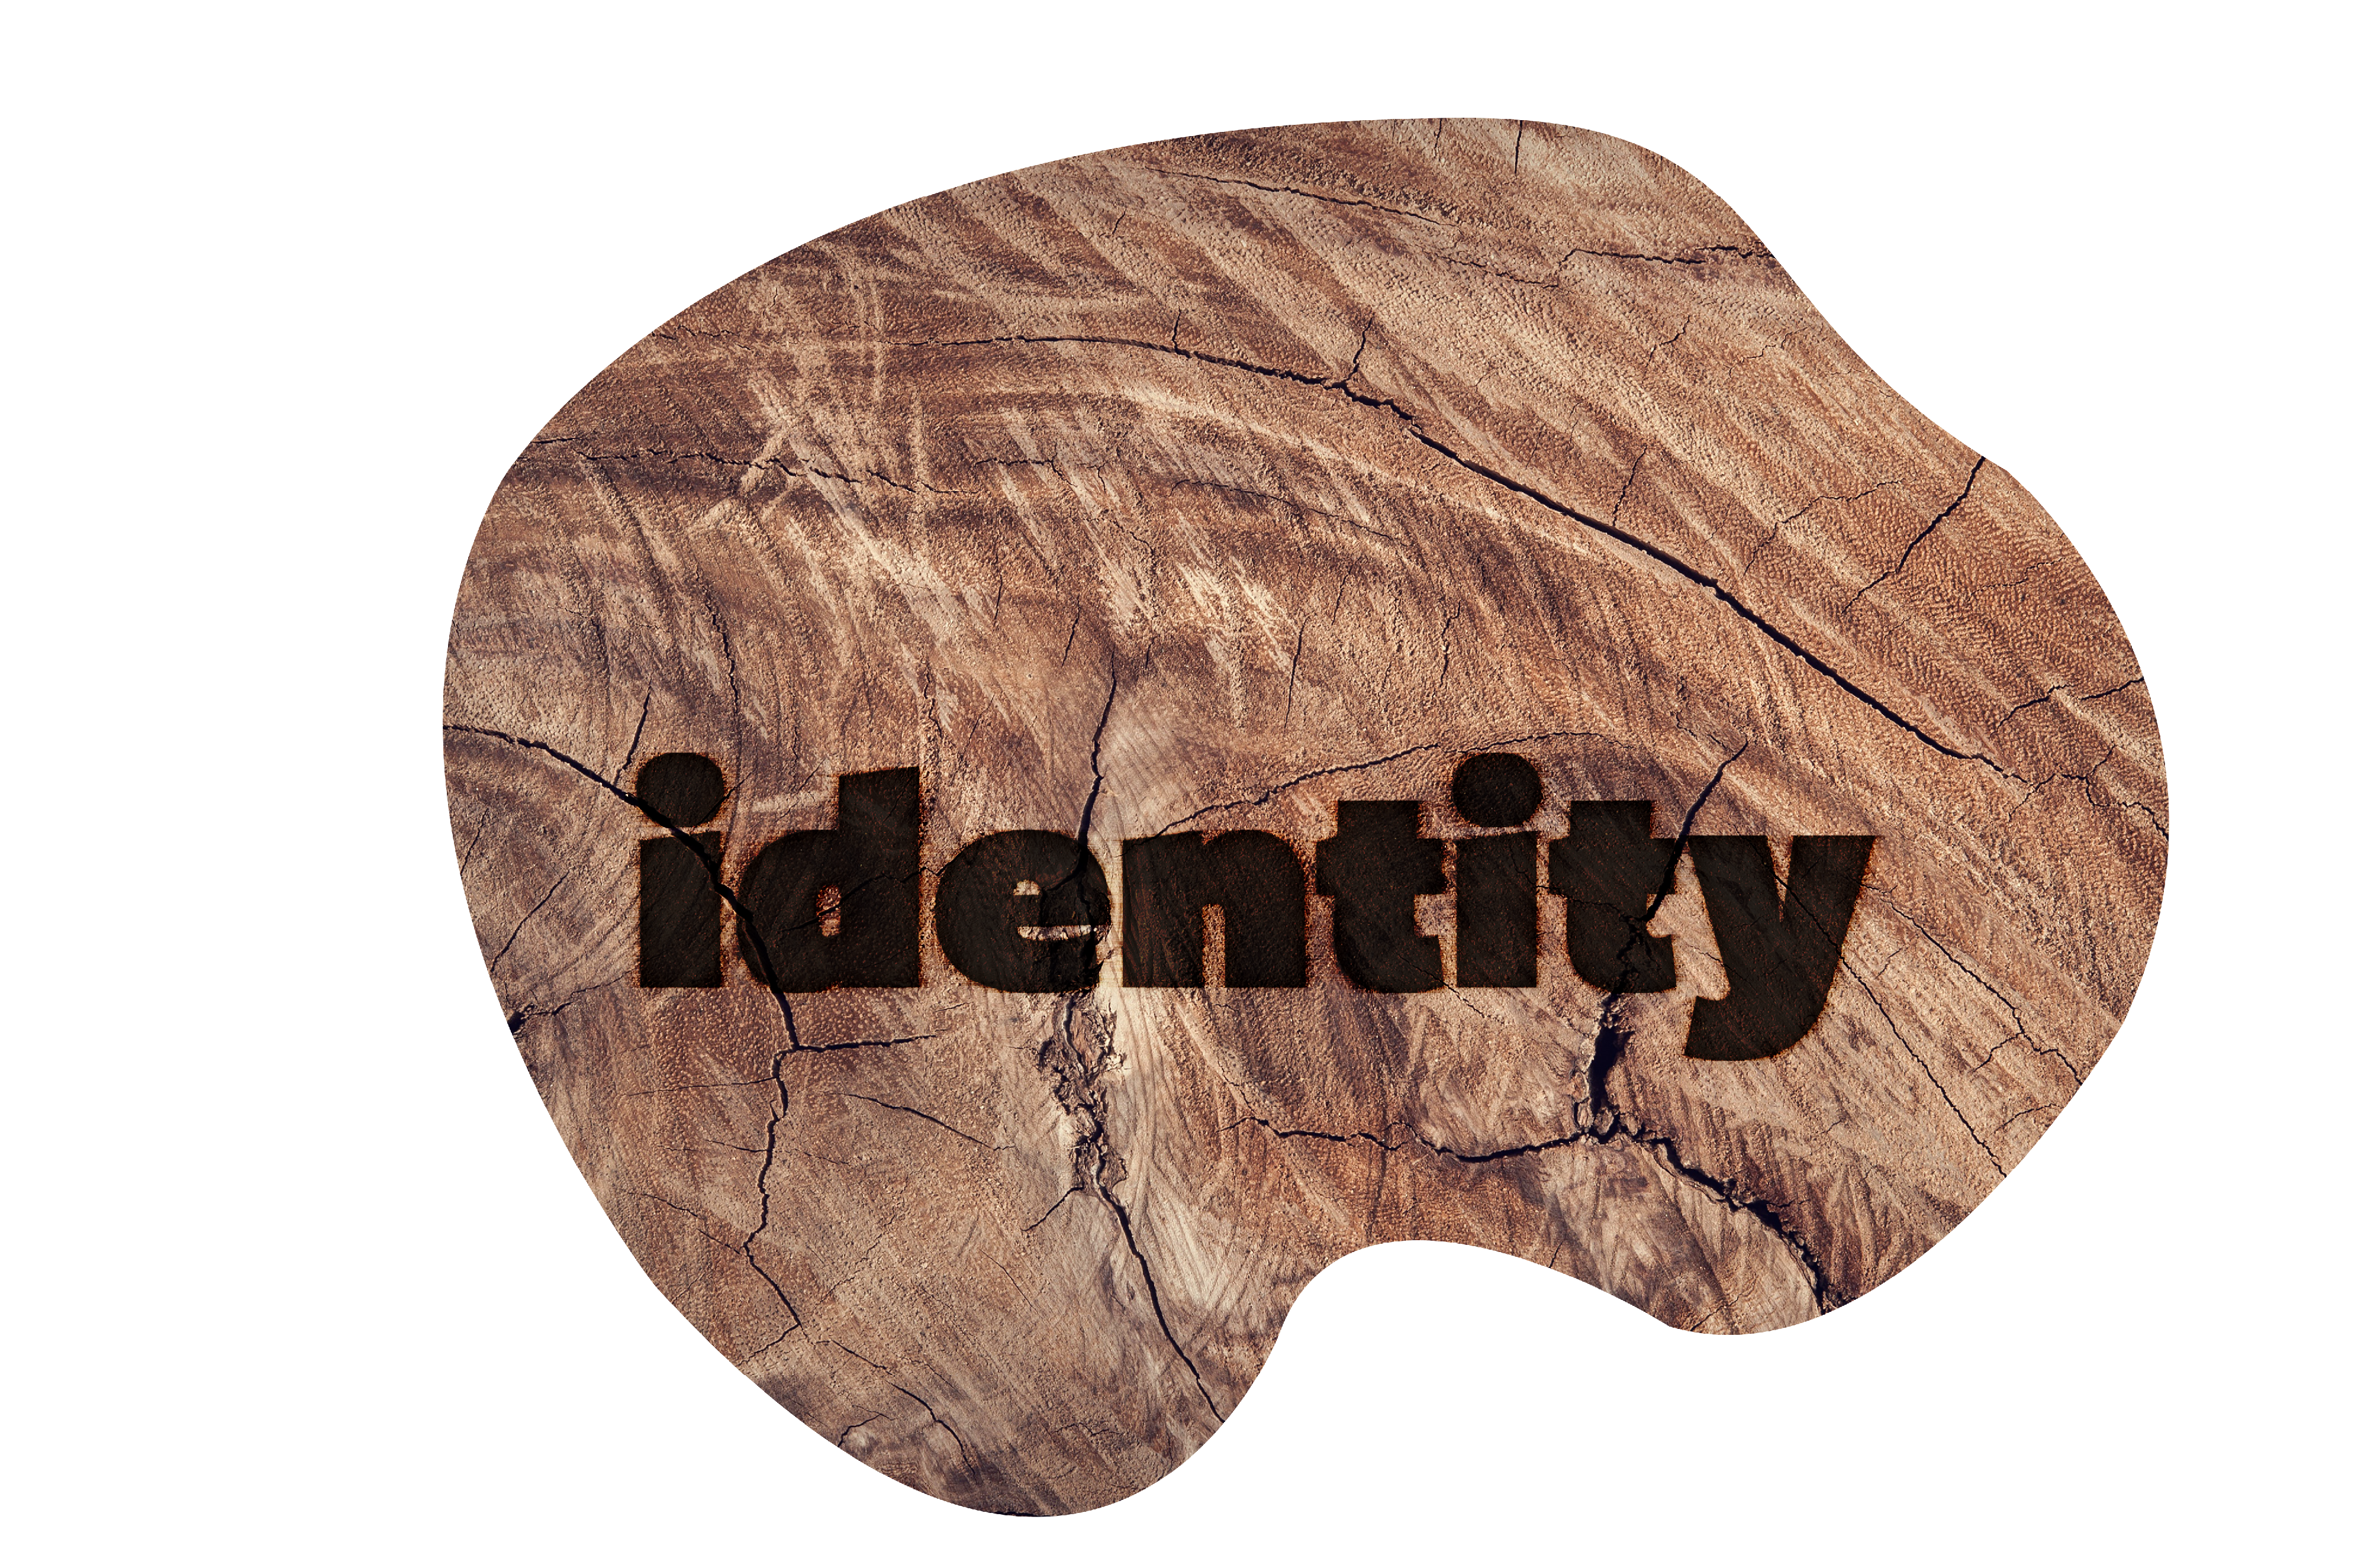 Graphical treatment of the word identity made to look like it is burned into wood